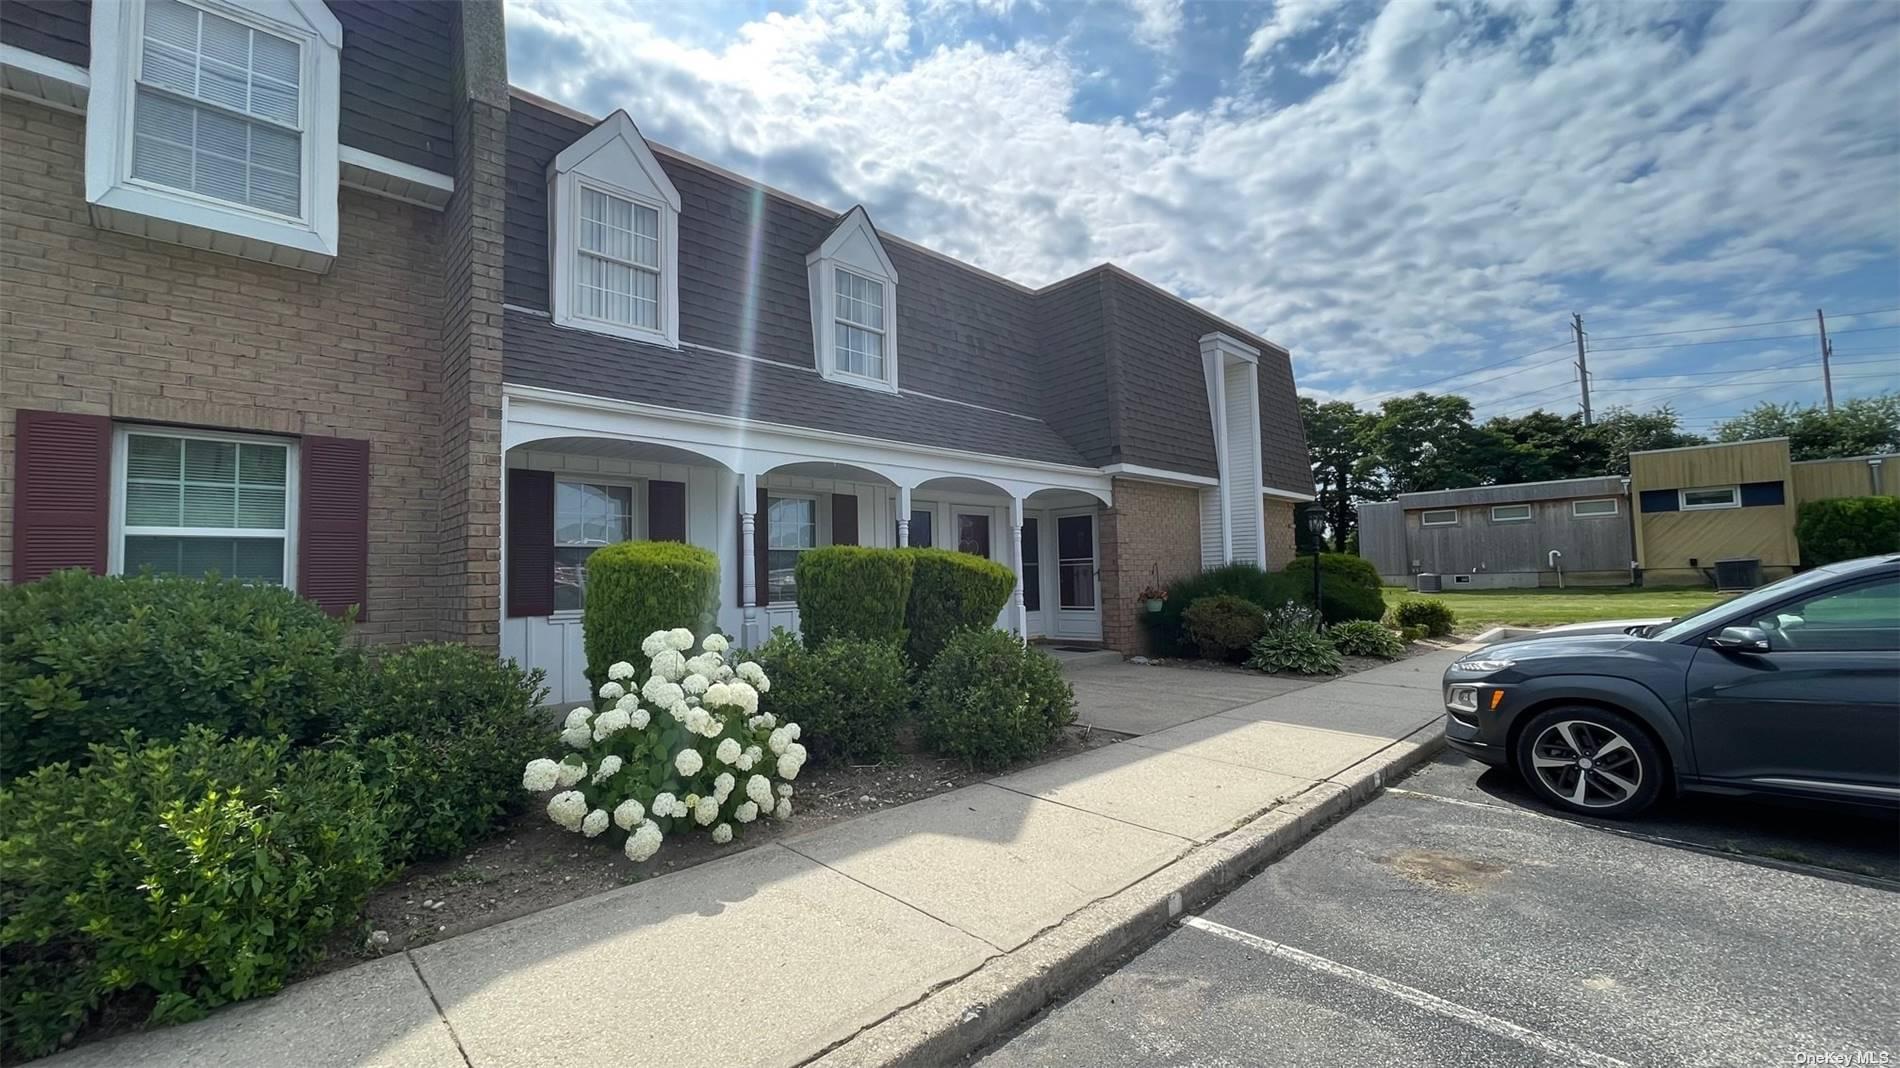 101 Sylvan Avenue #25 in Long Island, Miller Place, NY 11764